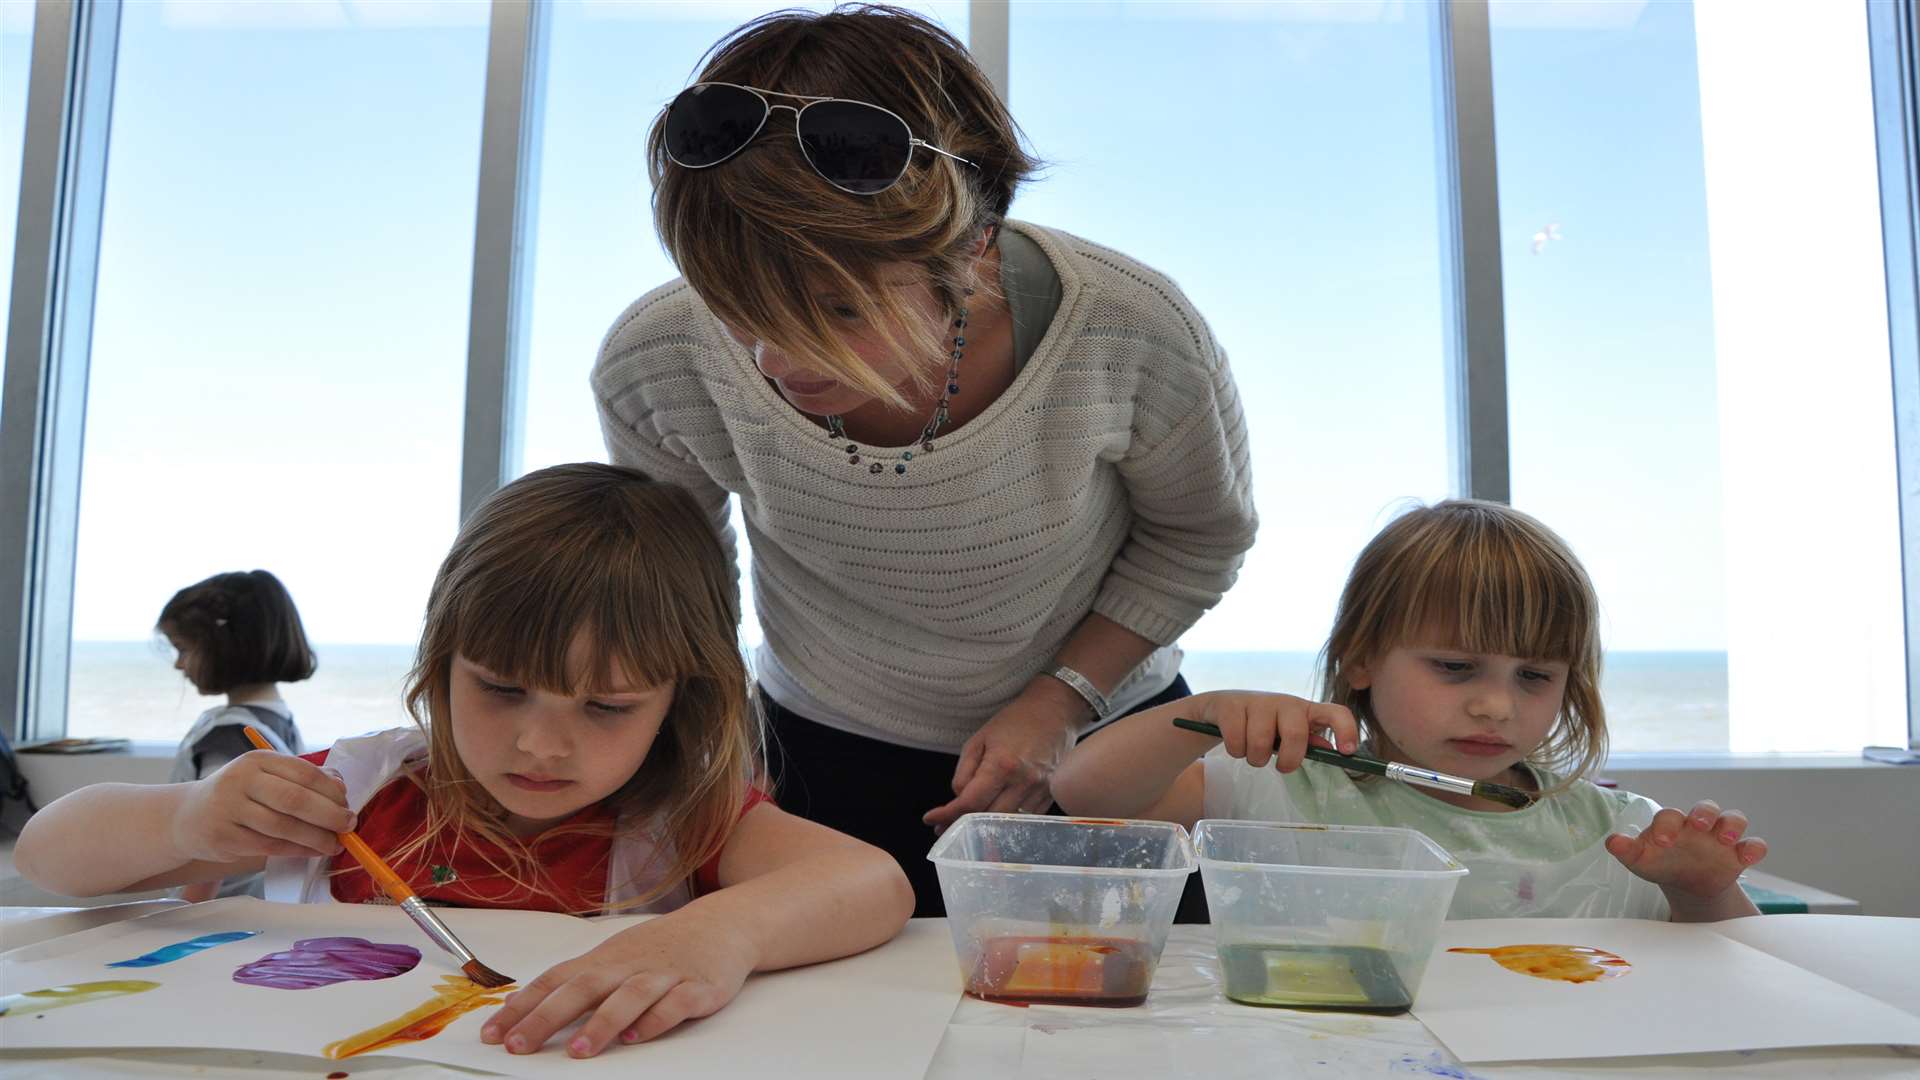 Get creative at the Turner Contemporary